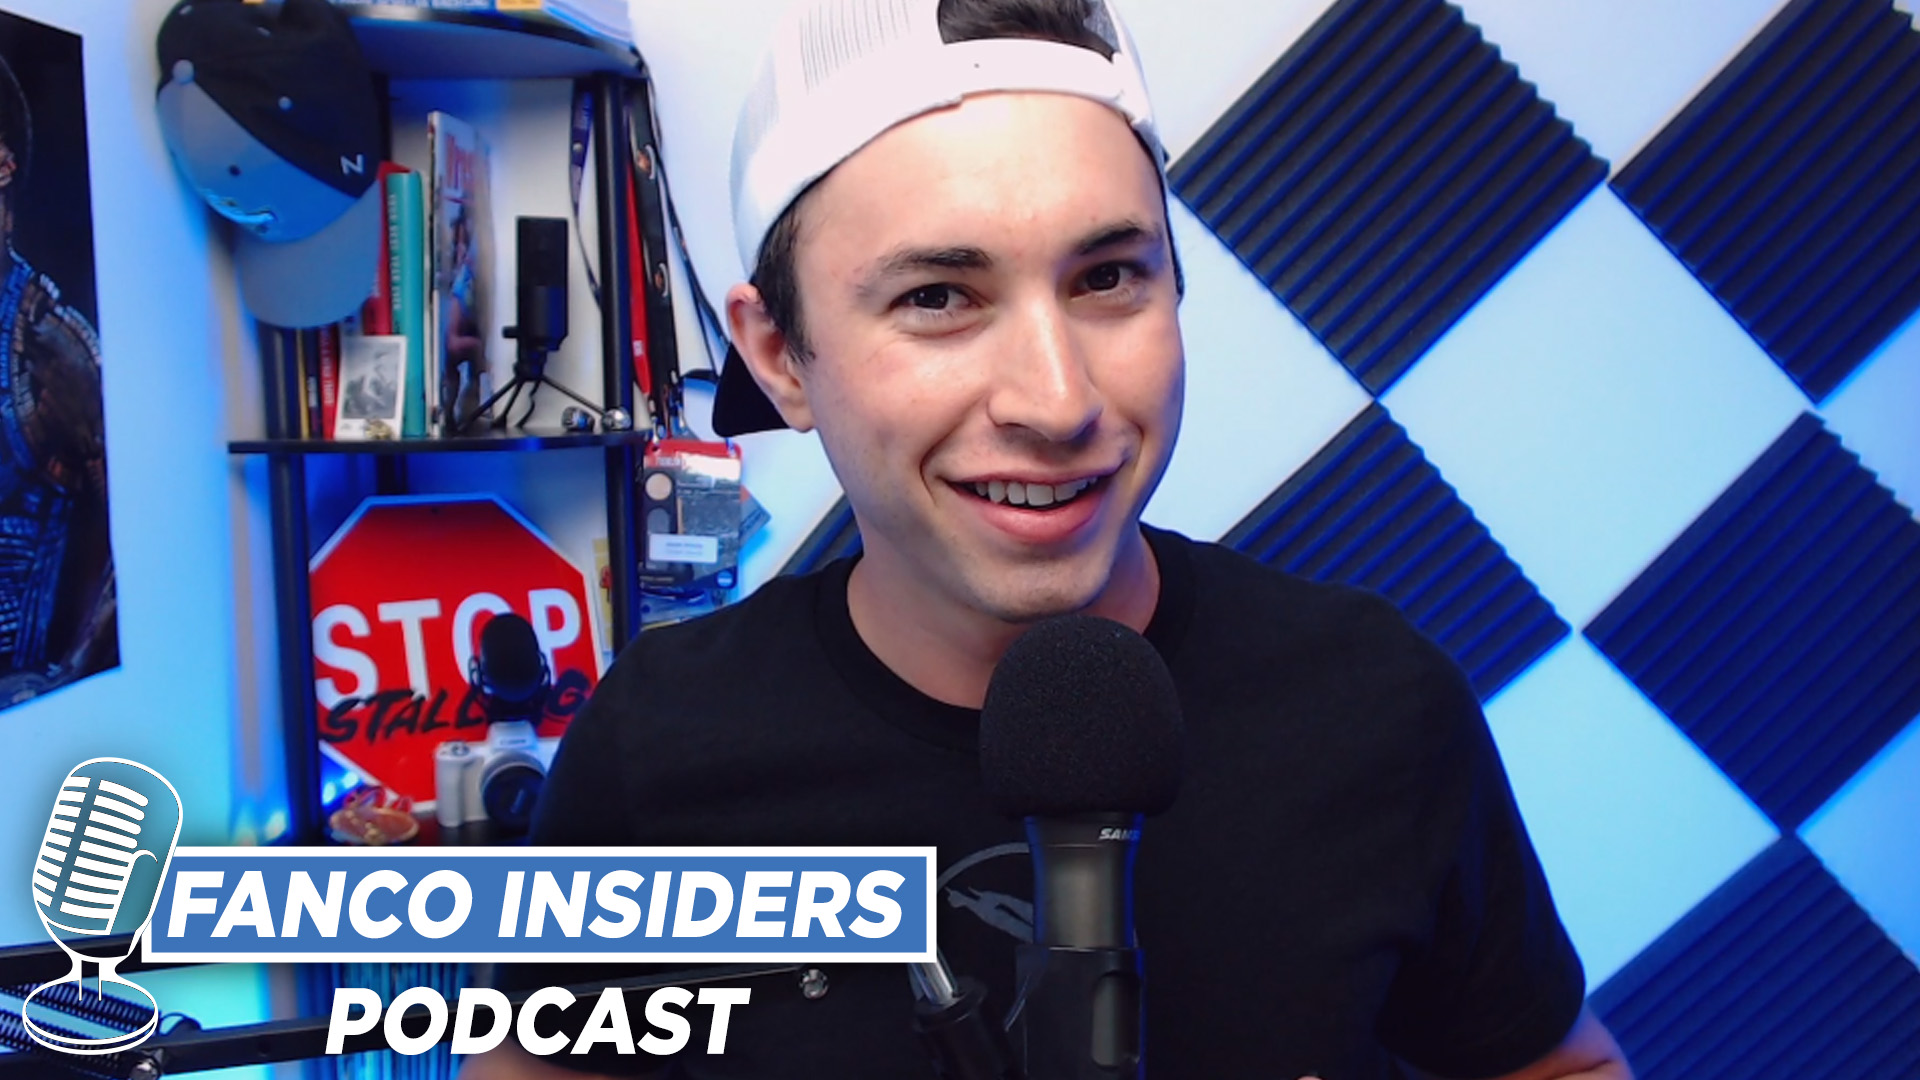 You are currently viewing Fanco Insiders Podcast #2